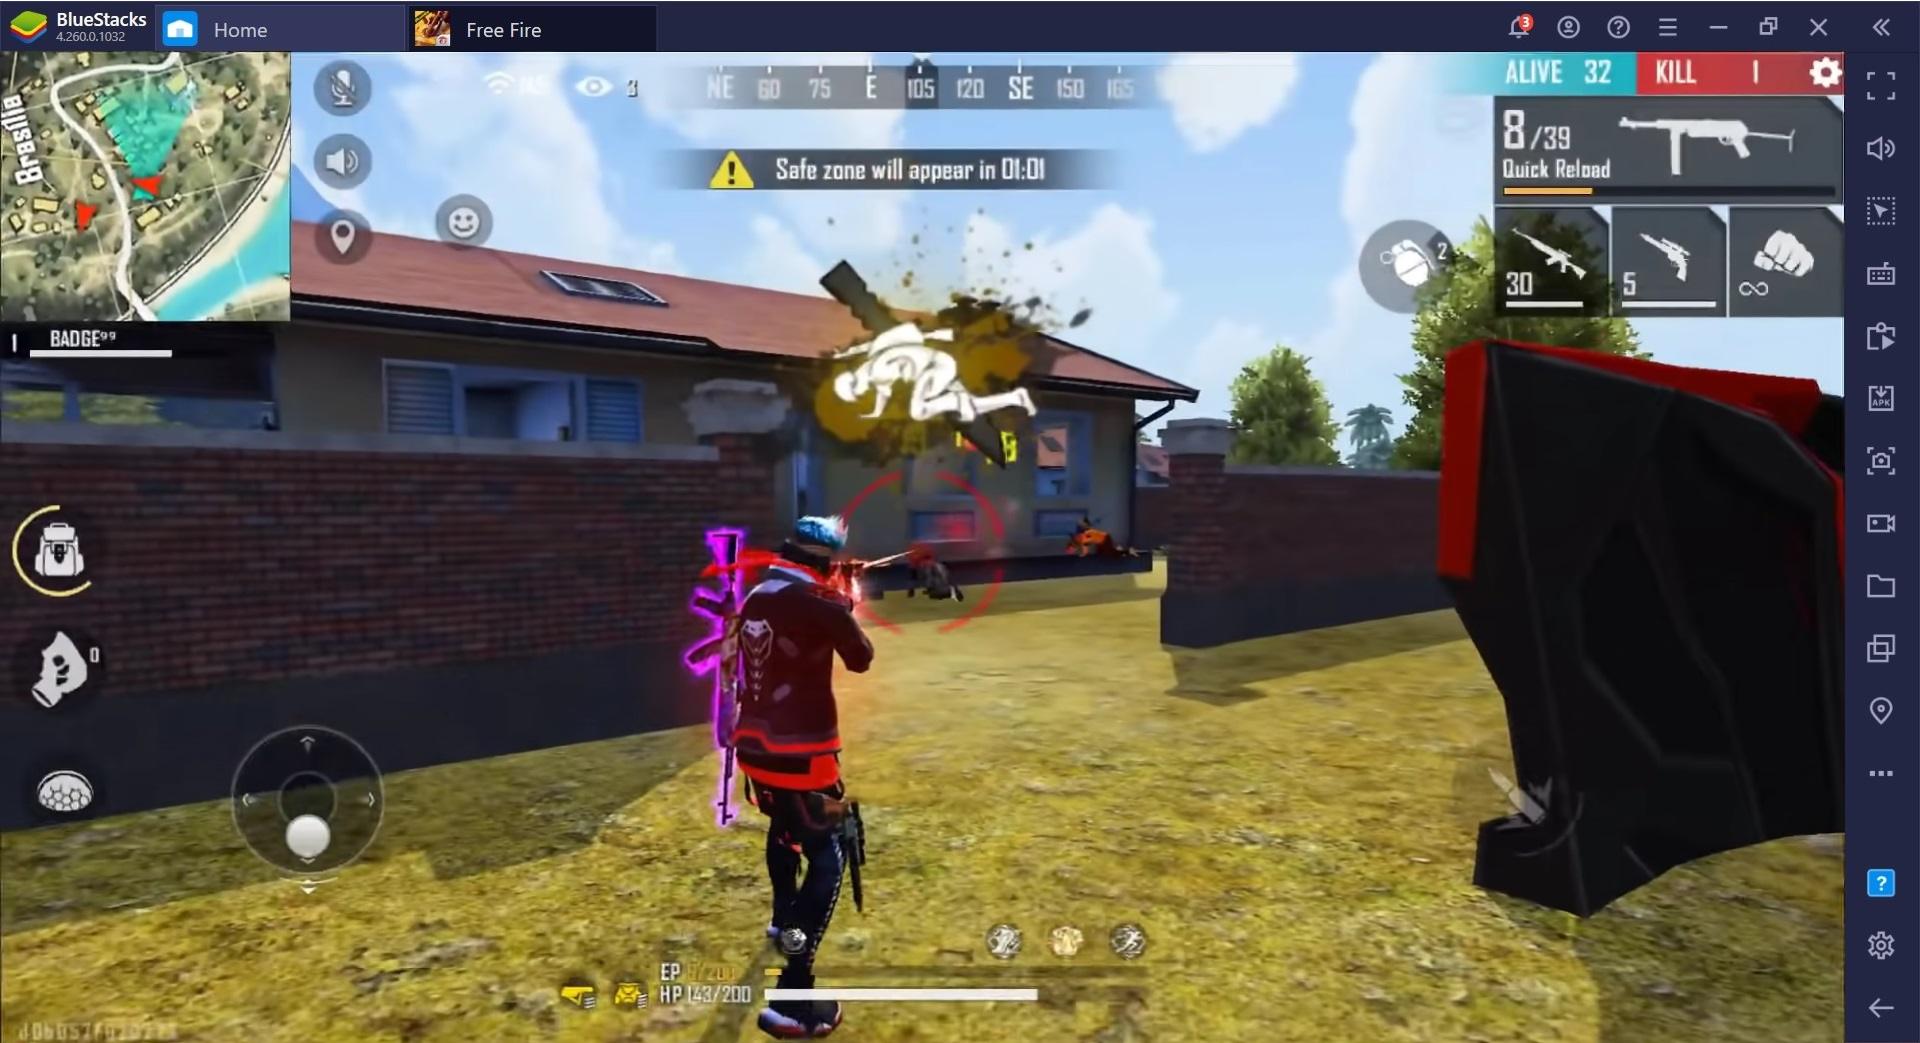 Free Fire Battle Royale Game Guide, Crouch Spray Vs Standing Spray